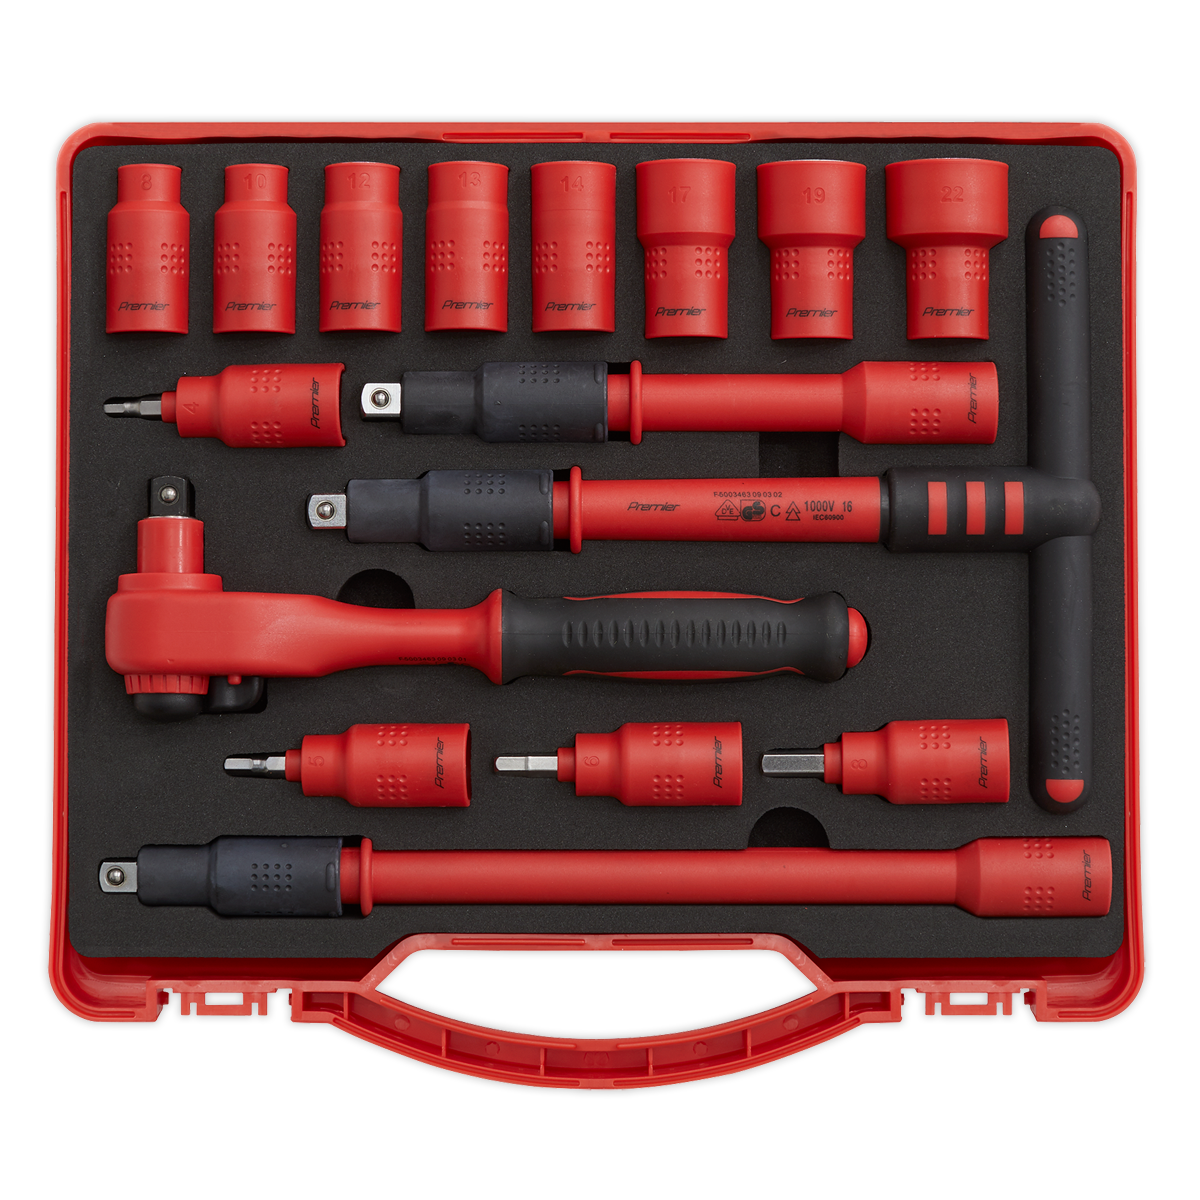 Sealey 16pc 3/8"Sq Drive Insulated Socket Set - VDE Approved AK7940